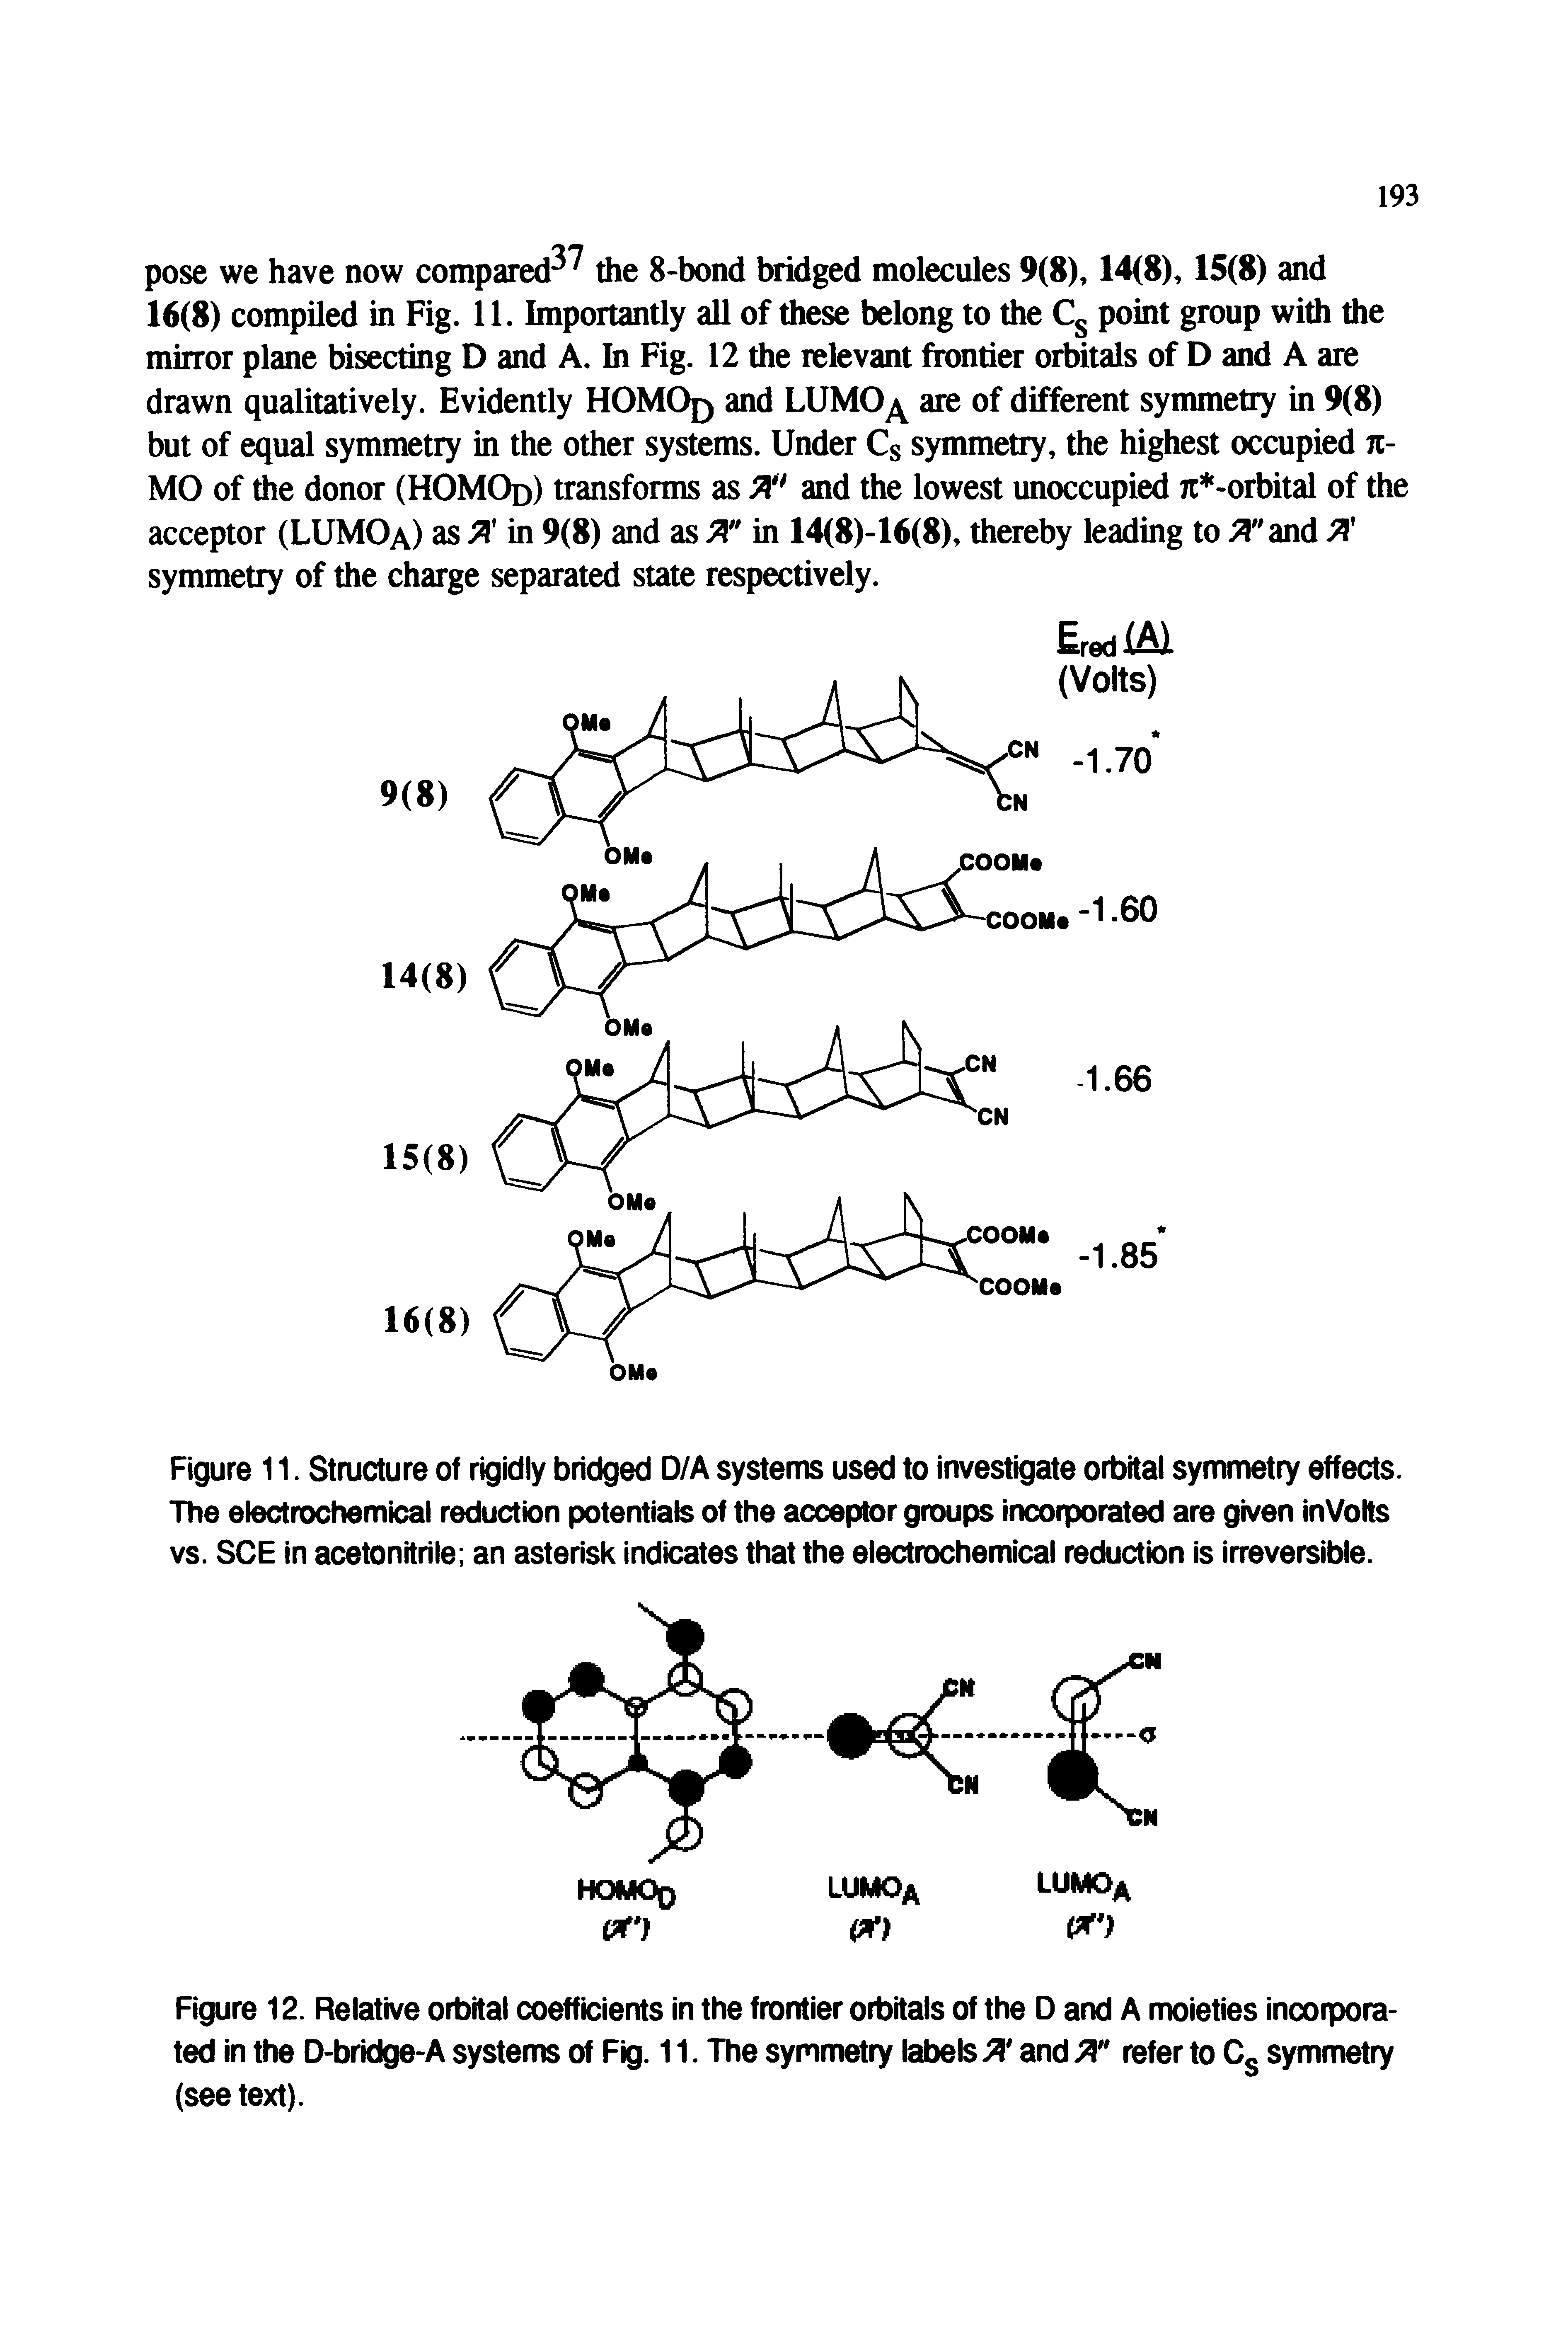 Figure 11. Structure of rigidly bridged D/A systems used to investigate orbital symmetry effects. The electrochemical reduction potentials of the acceptor groups incorporated are given inVolts vs. SCE in acetonitrile an asterisk indicates that the electrochemical reduction is irreversible.